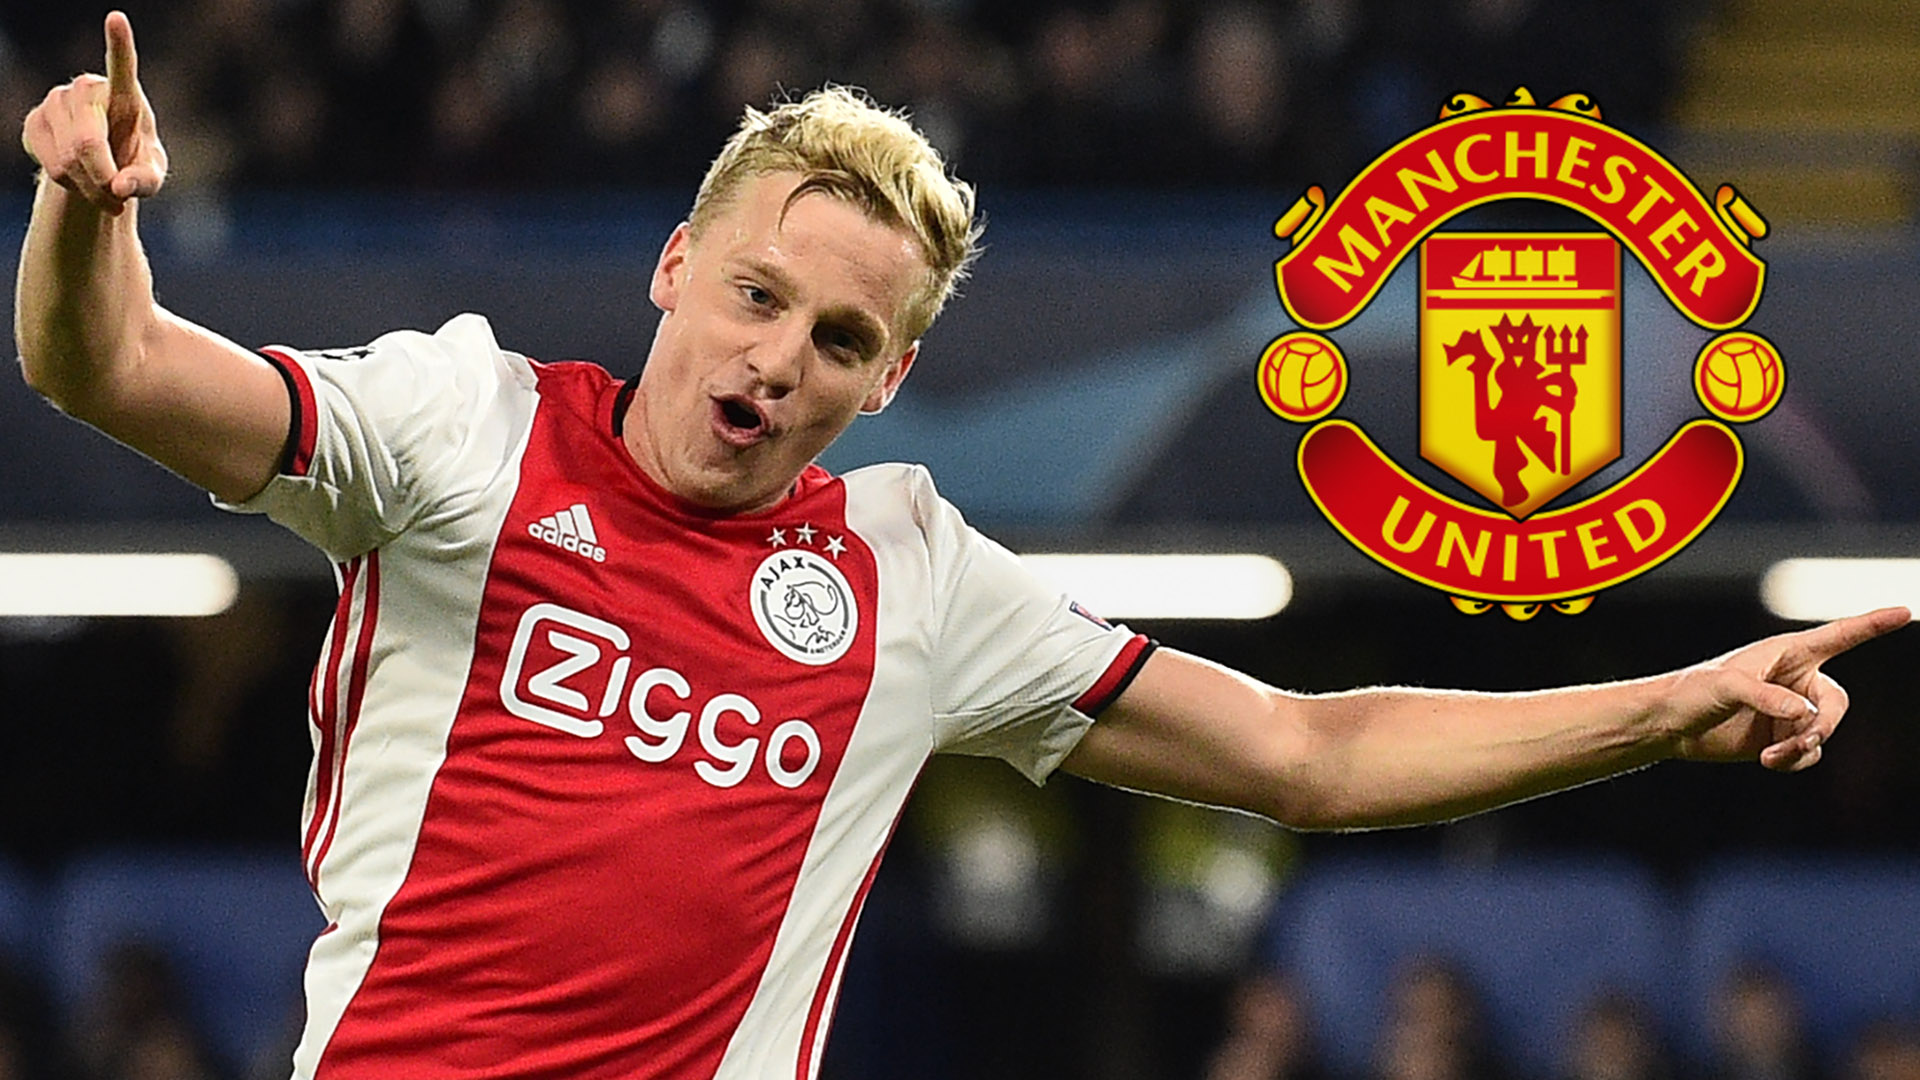 'Van de Beek will work really well at Man Utd' - Ajax star can be a 'fantastic' addition to Solskjaer's ranks, says Bosnich